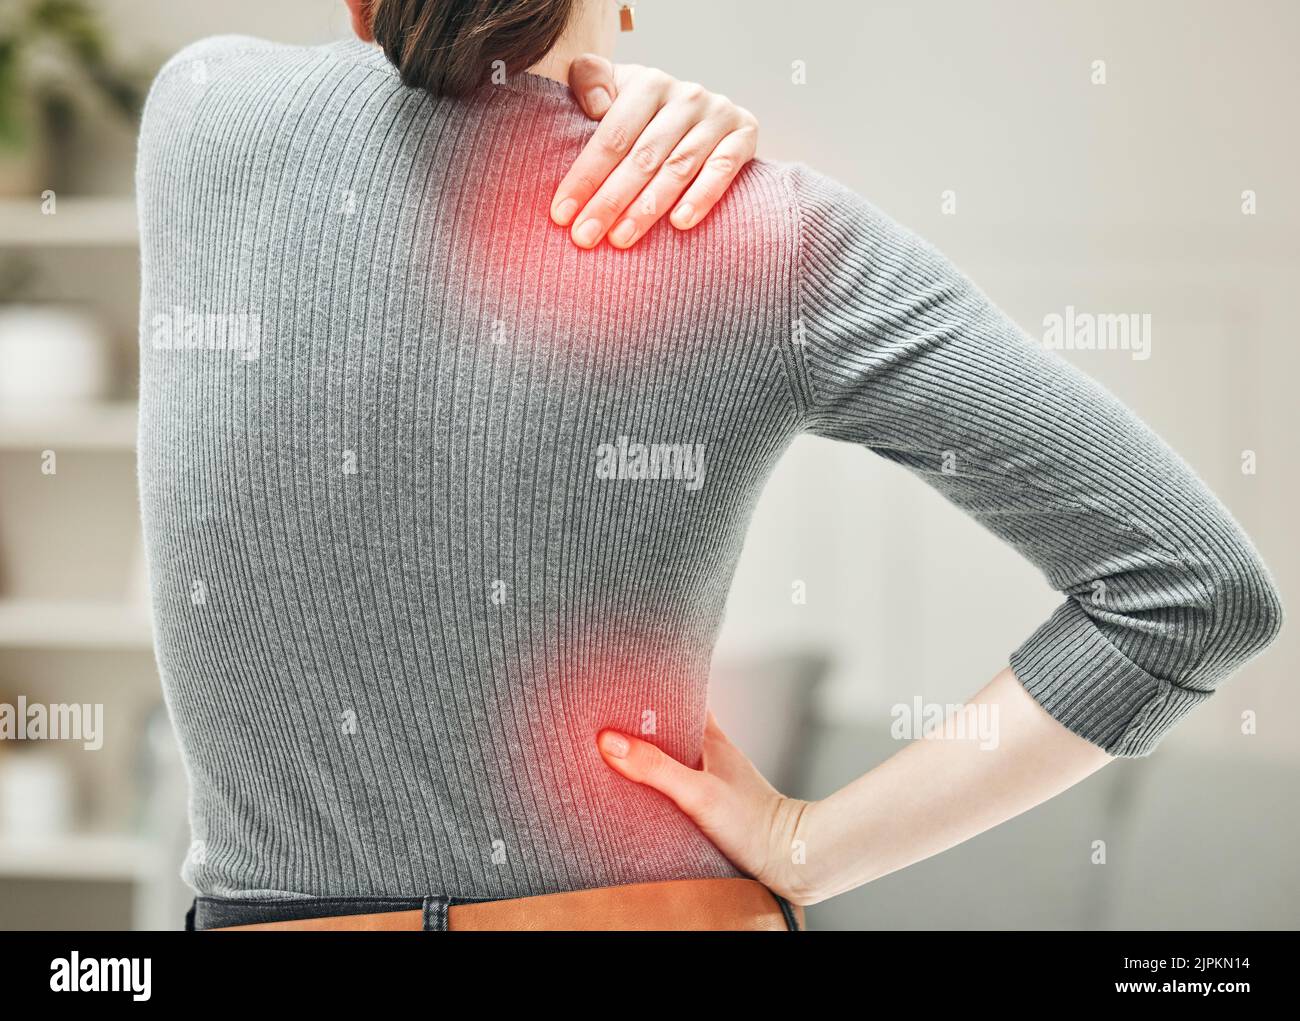 Shoulder, hip and back pain of a woman touching and holding a painful area on her body in red. Closeup of a female feeling strain, ache and discomfort Stock Photo